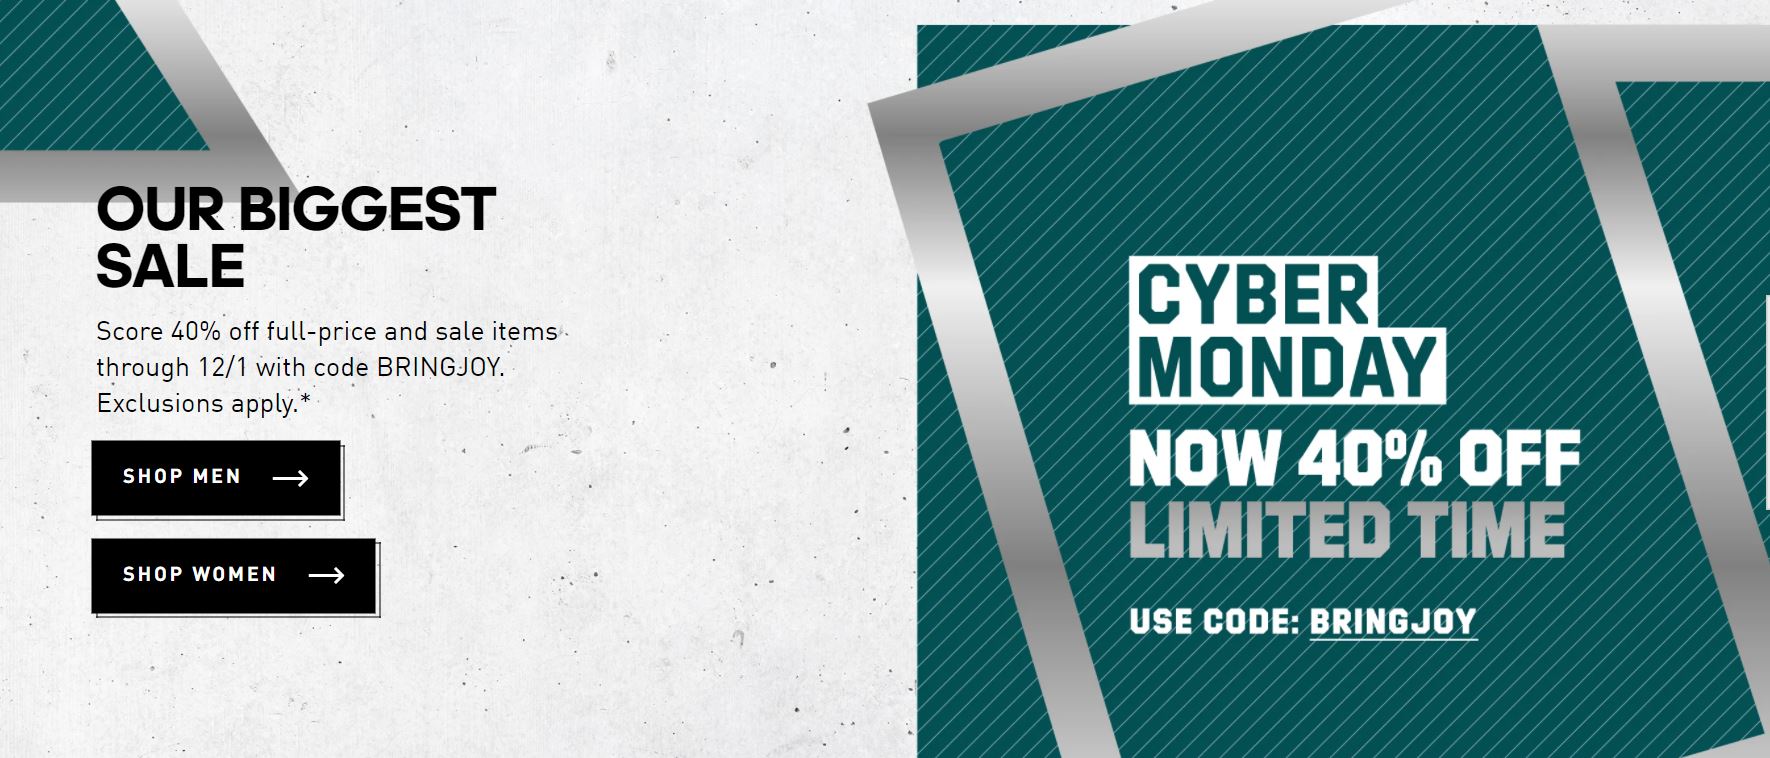 Adidas Cyber monday 2020 now 40% off 